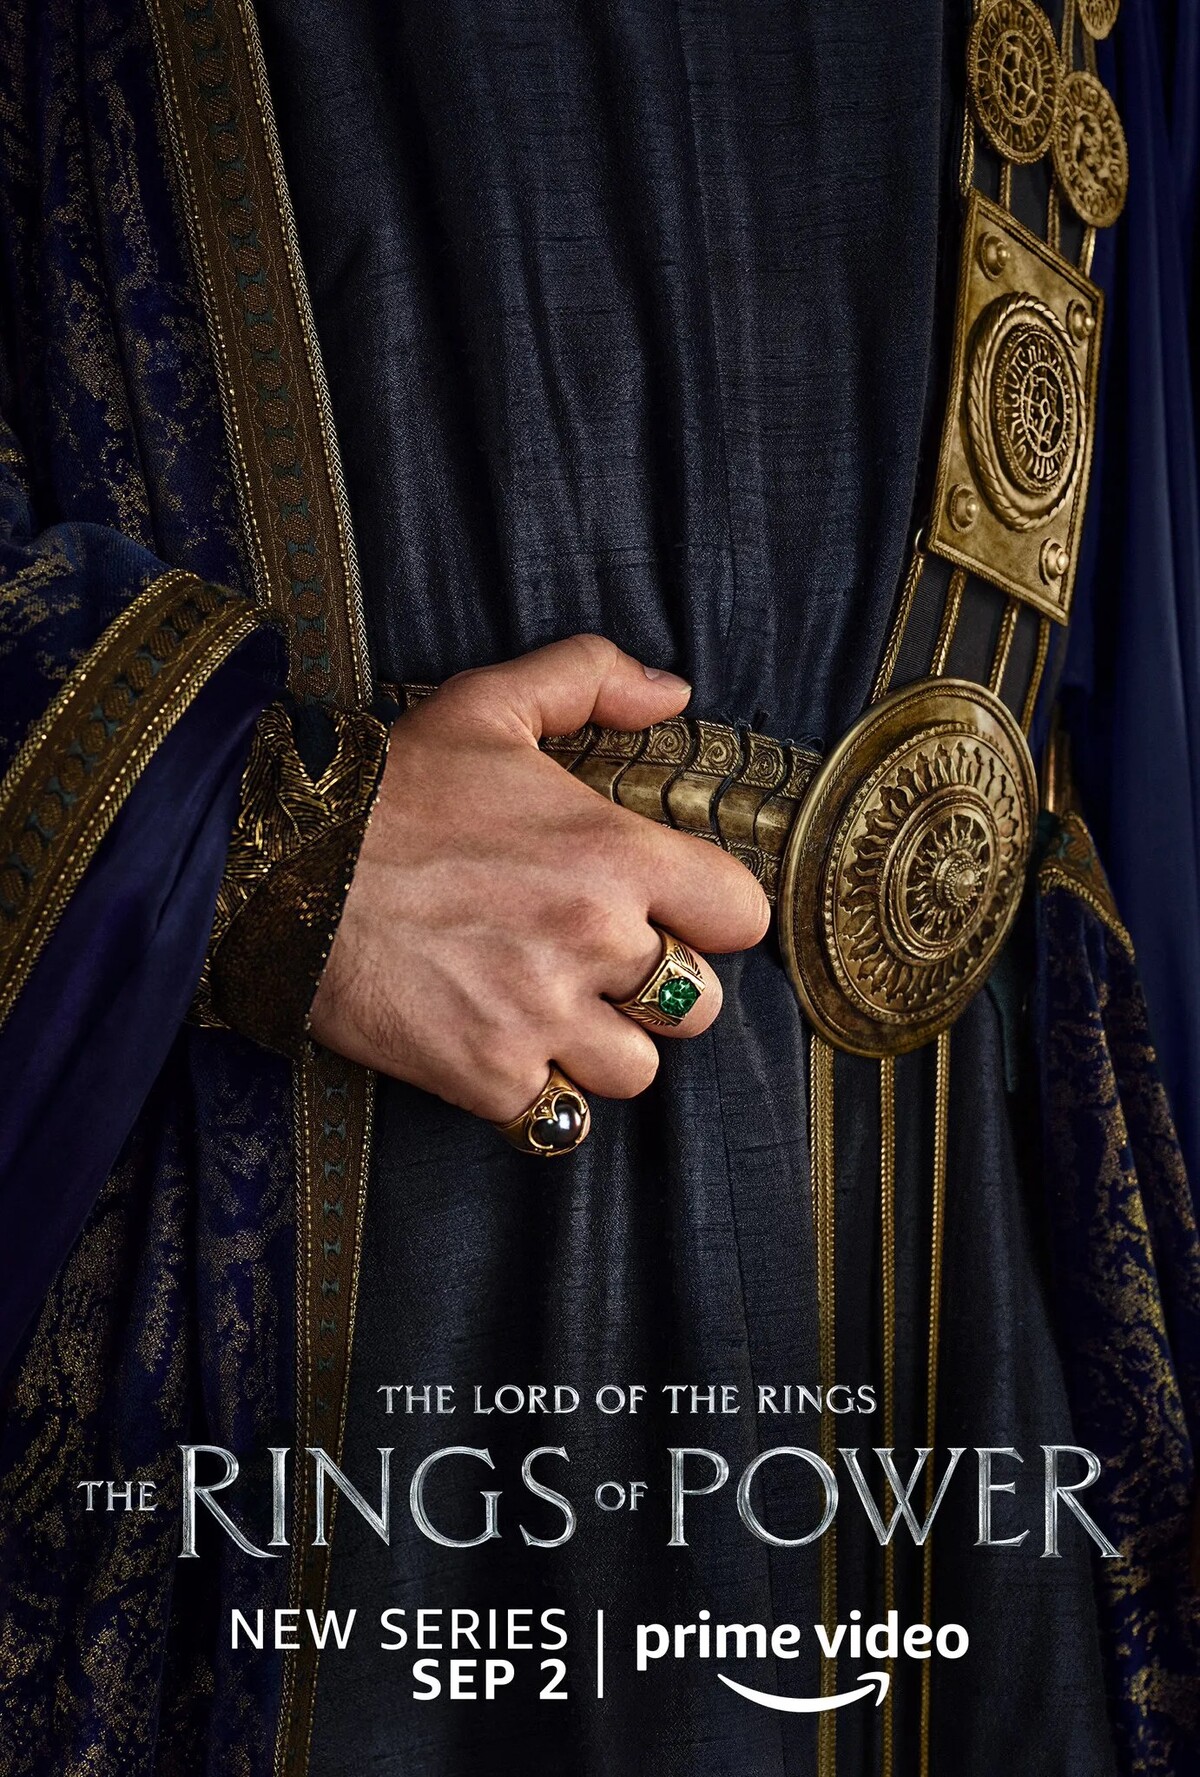 Pán Prsteňov
The Lord of the Rings: The Rings of Power